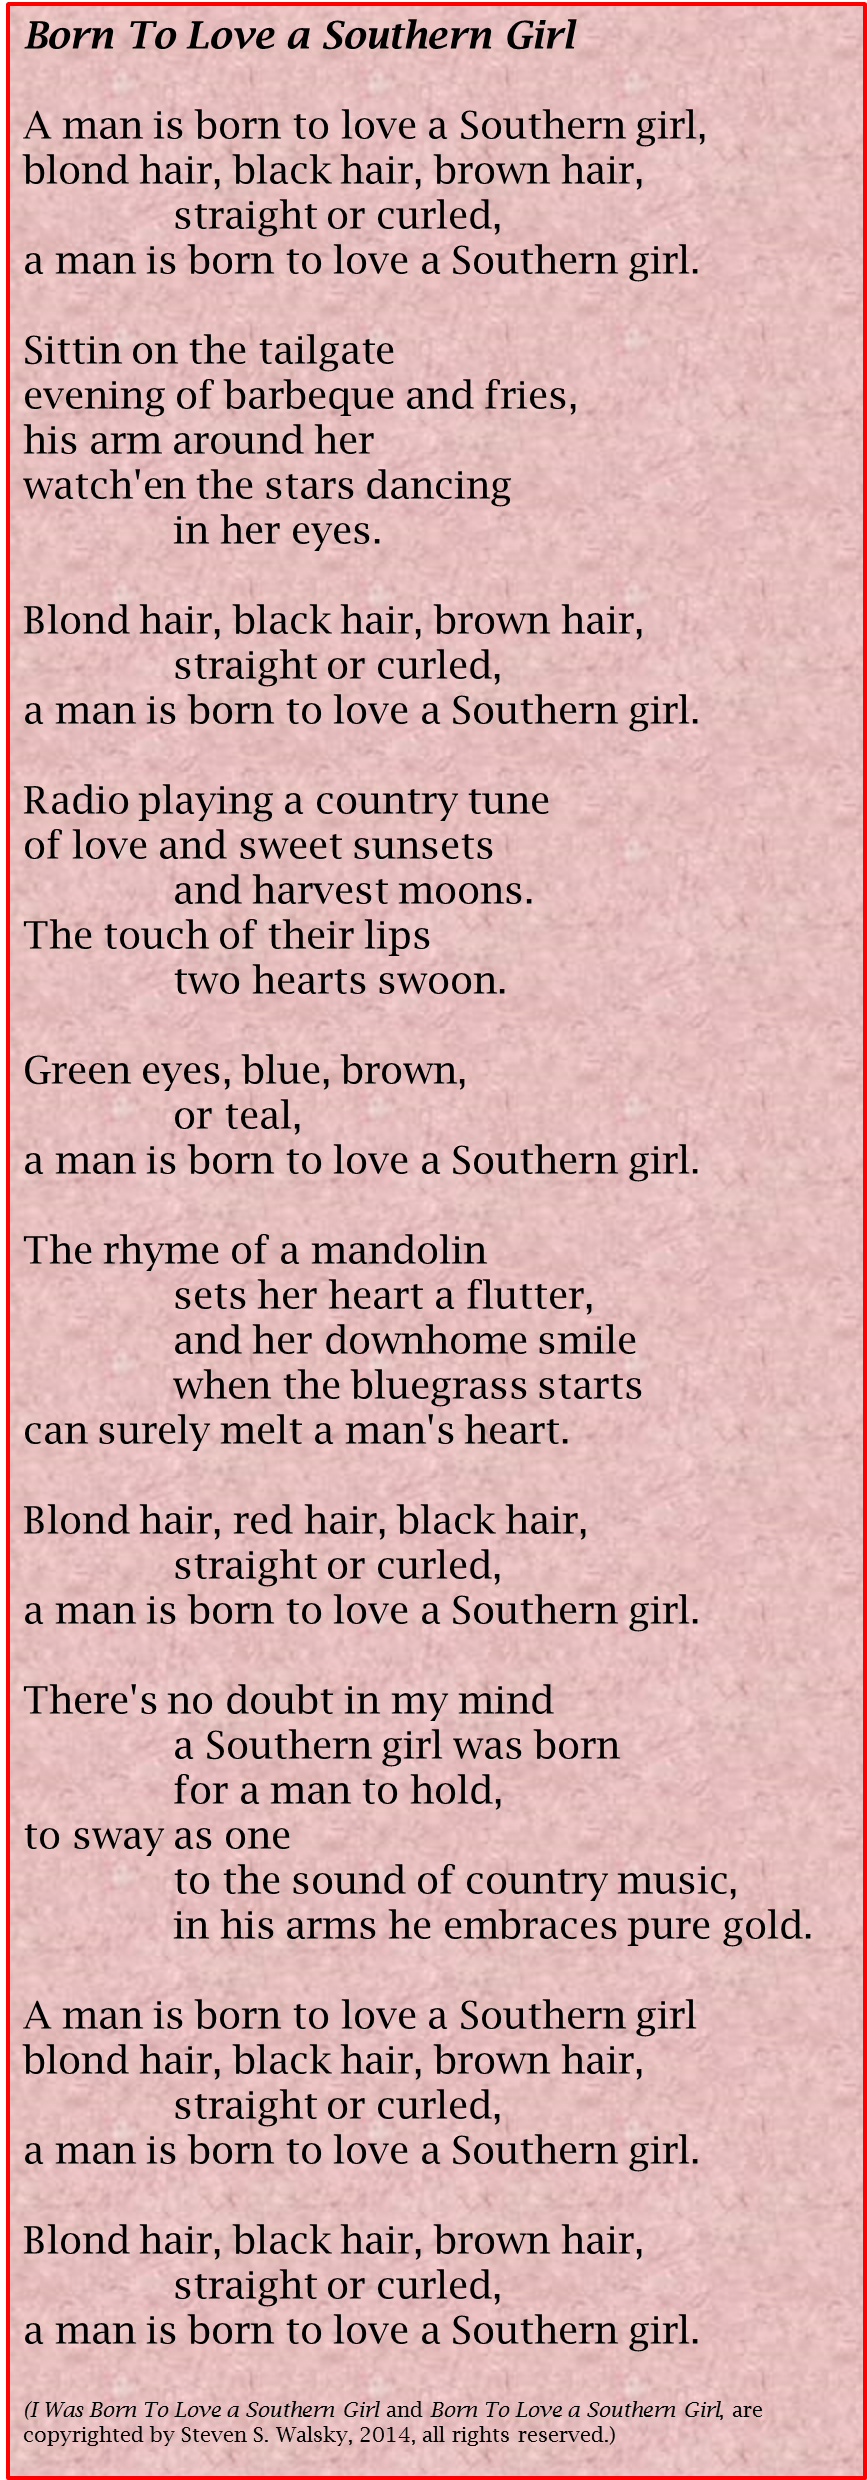 ... personalizedâ€™ singer version, I Was Born To Love a Southern Girl